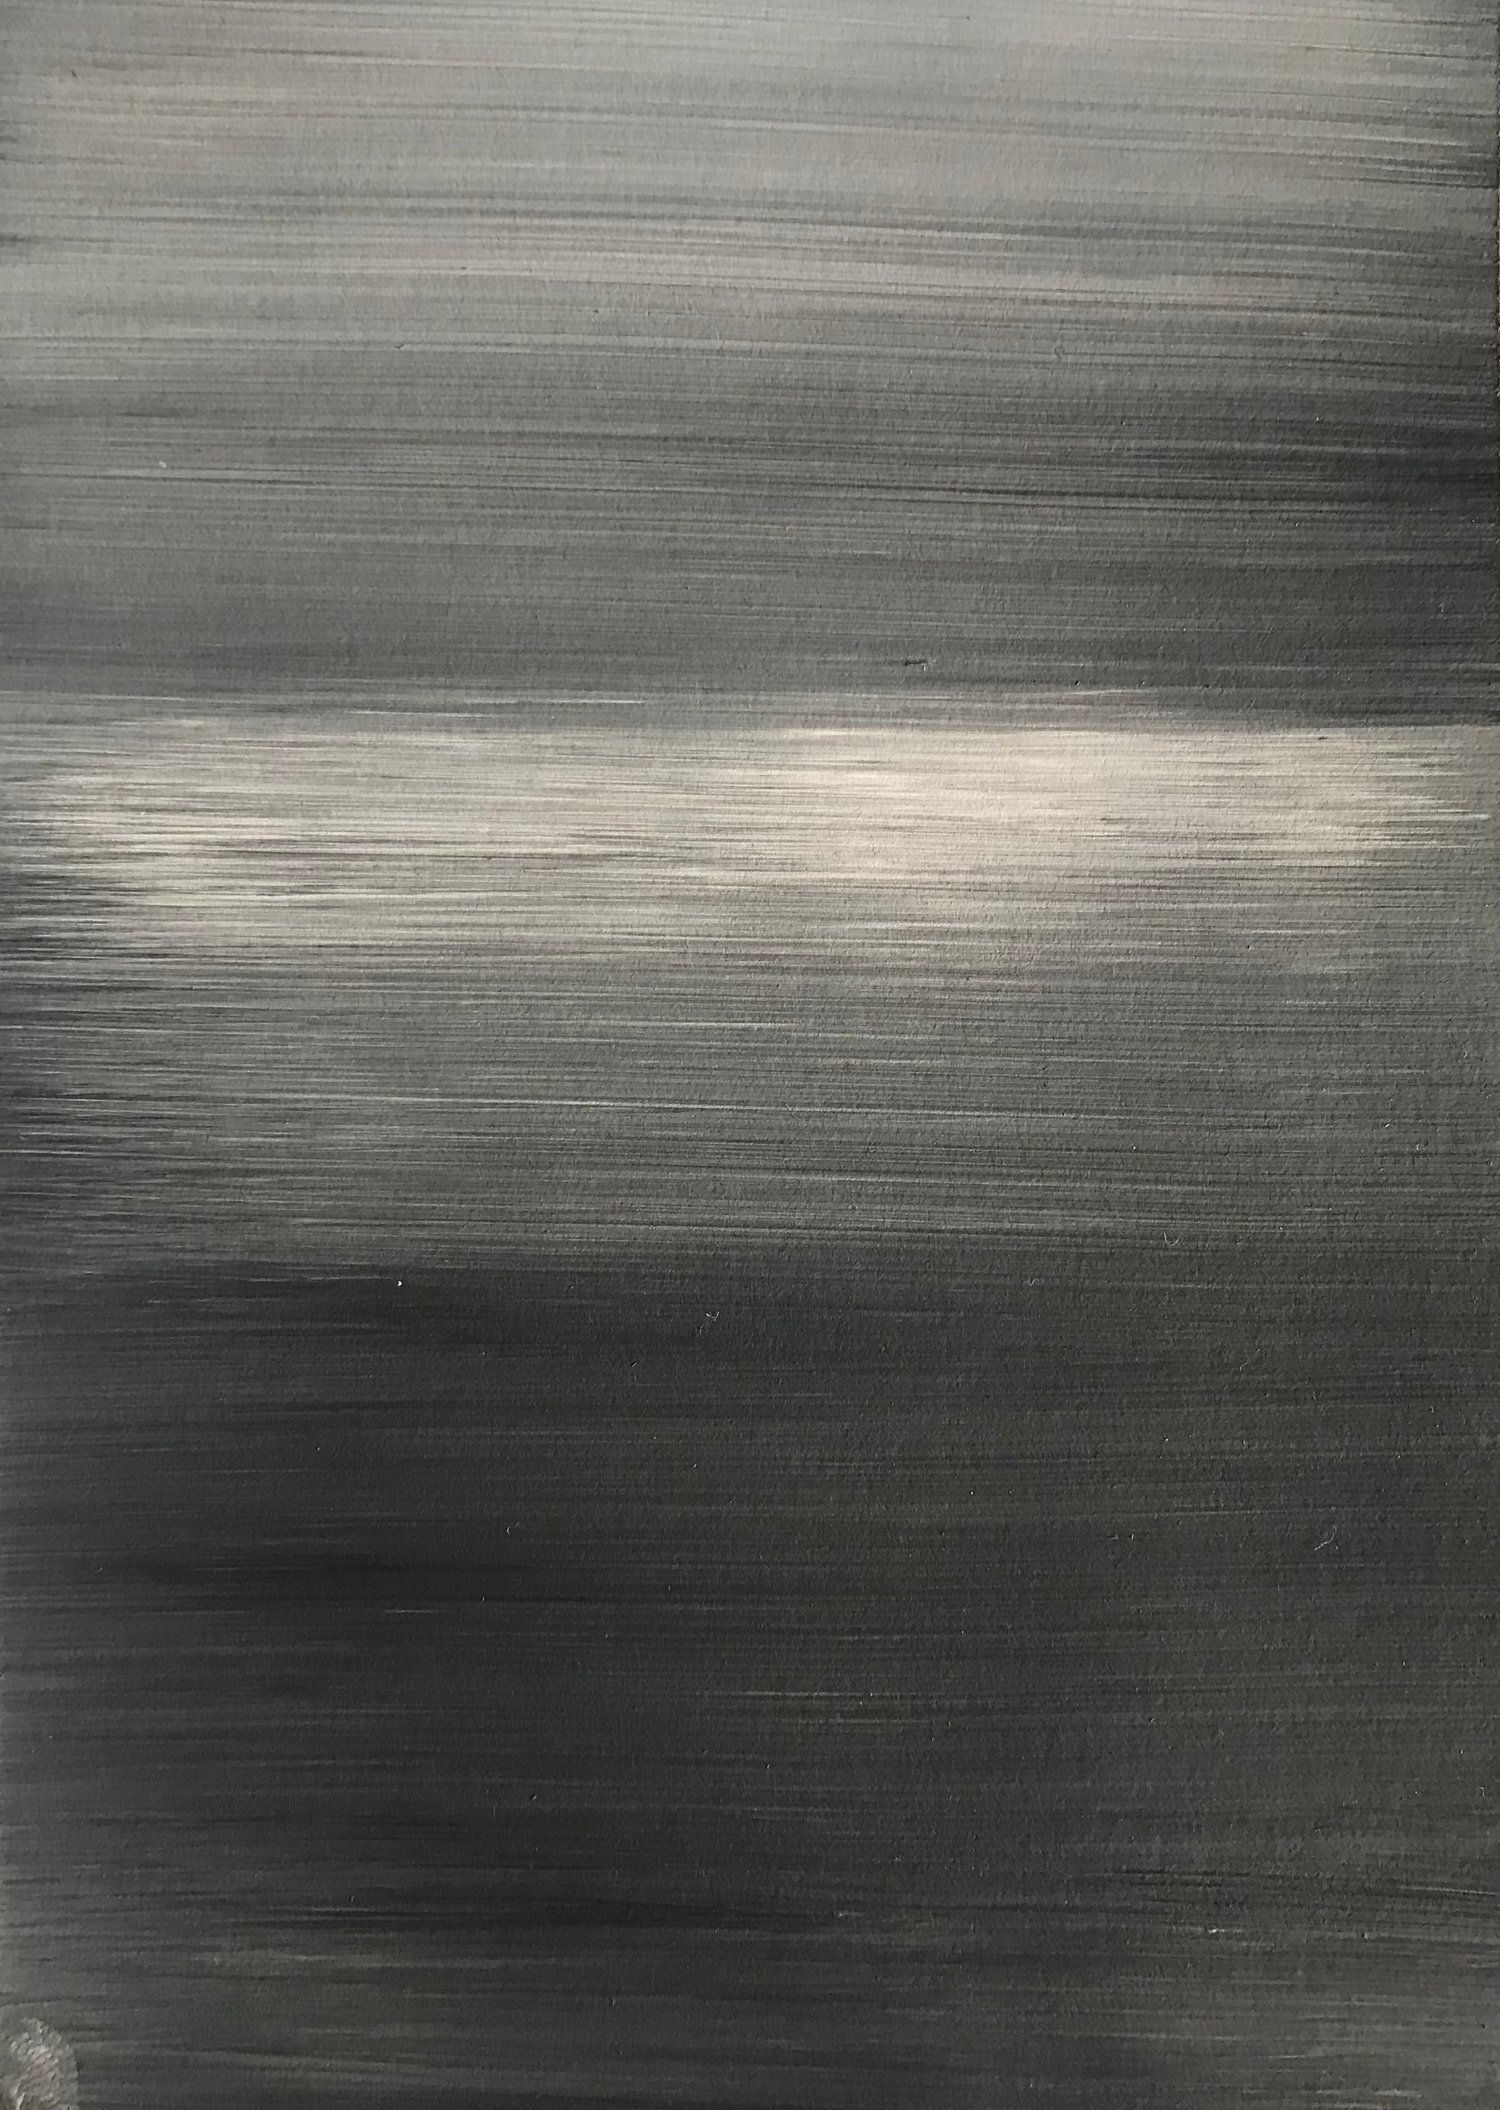 Monochrome In Moving - acrylic on aquarelle paper 10,4x14,7 cm